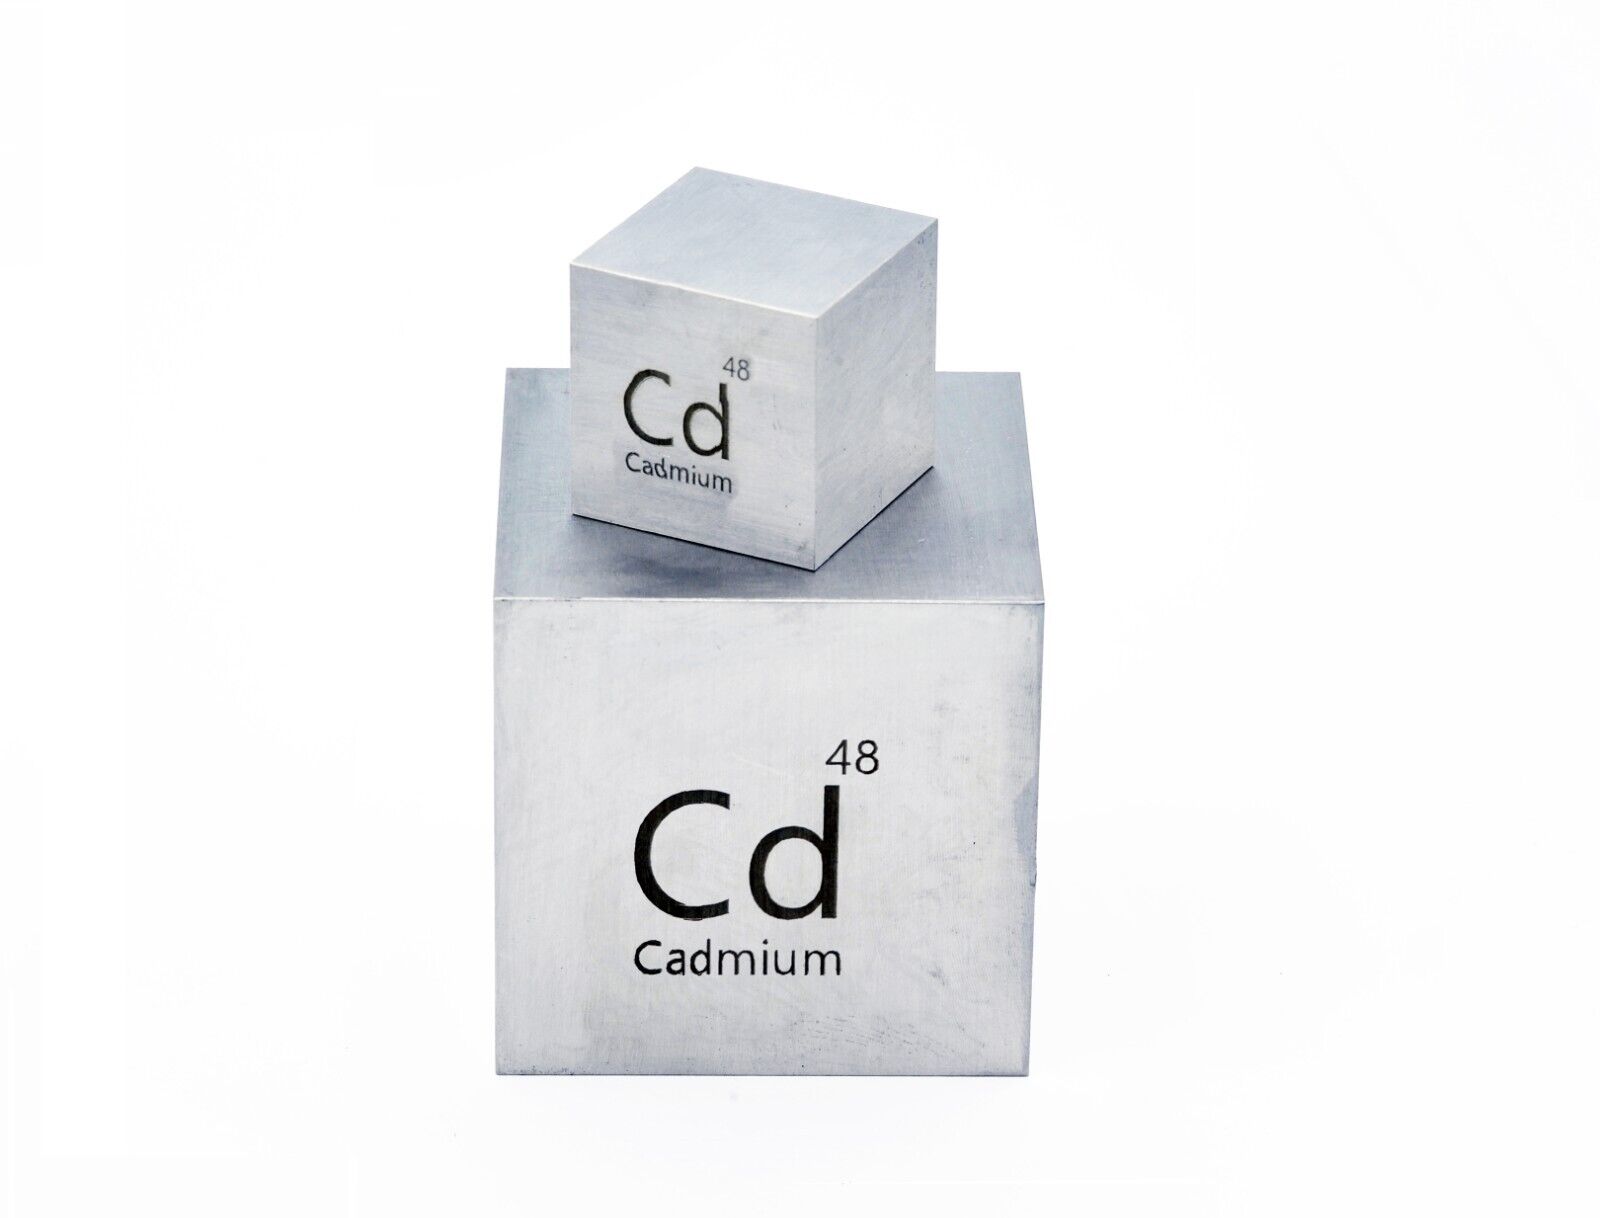 Cadmium Metal 25.4mm 1 inch Density Cube 99.9% for Element Collection USA SHIP